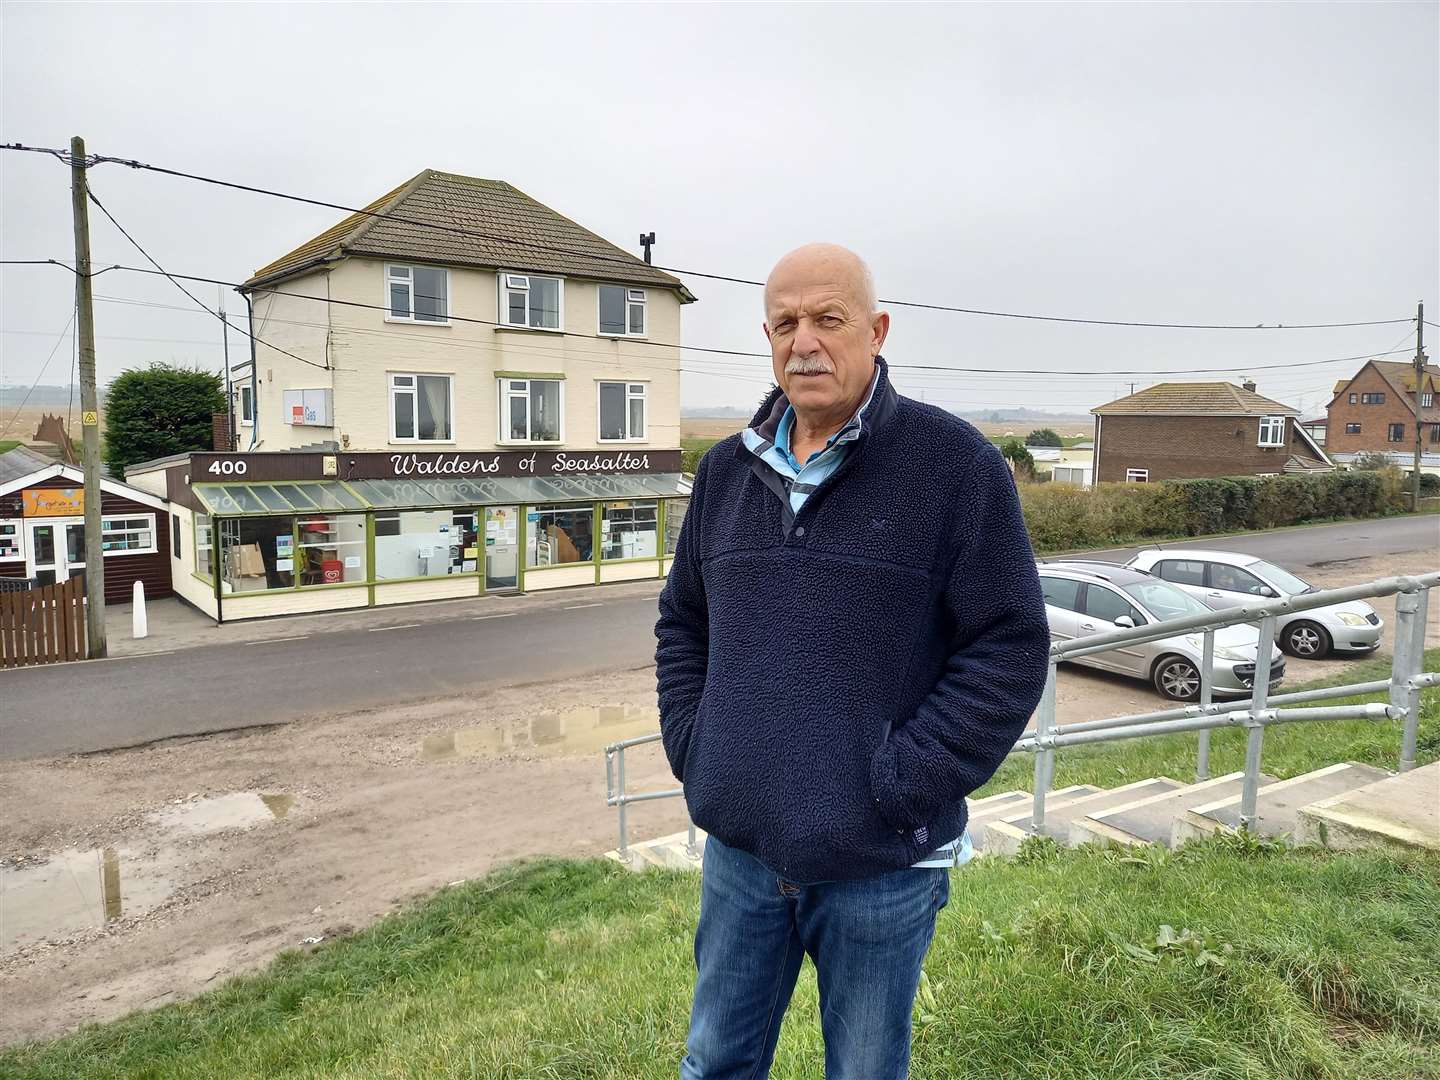 Customers to Peter Hague's shop, Waldens of Seasalter, will get 30 minutes free